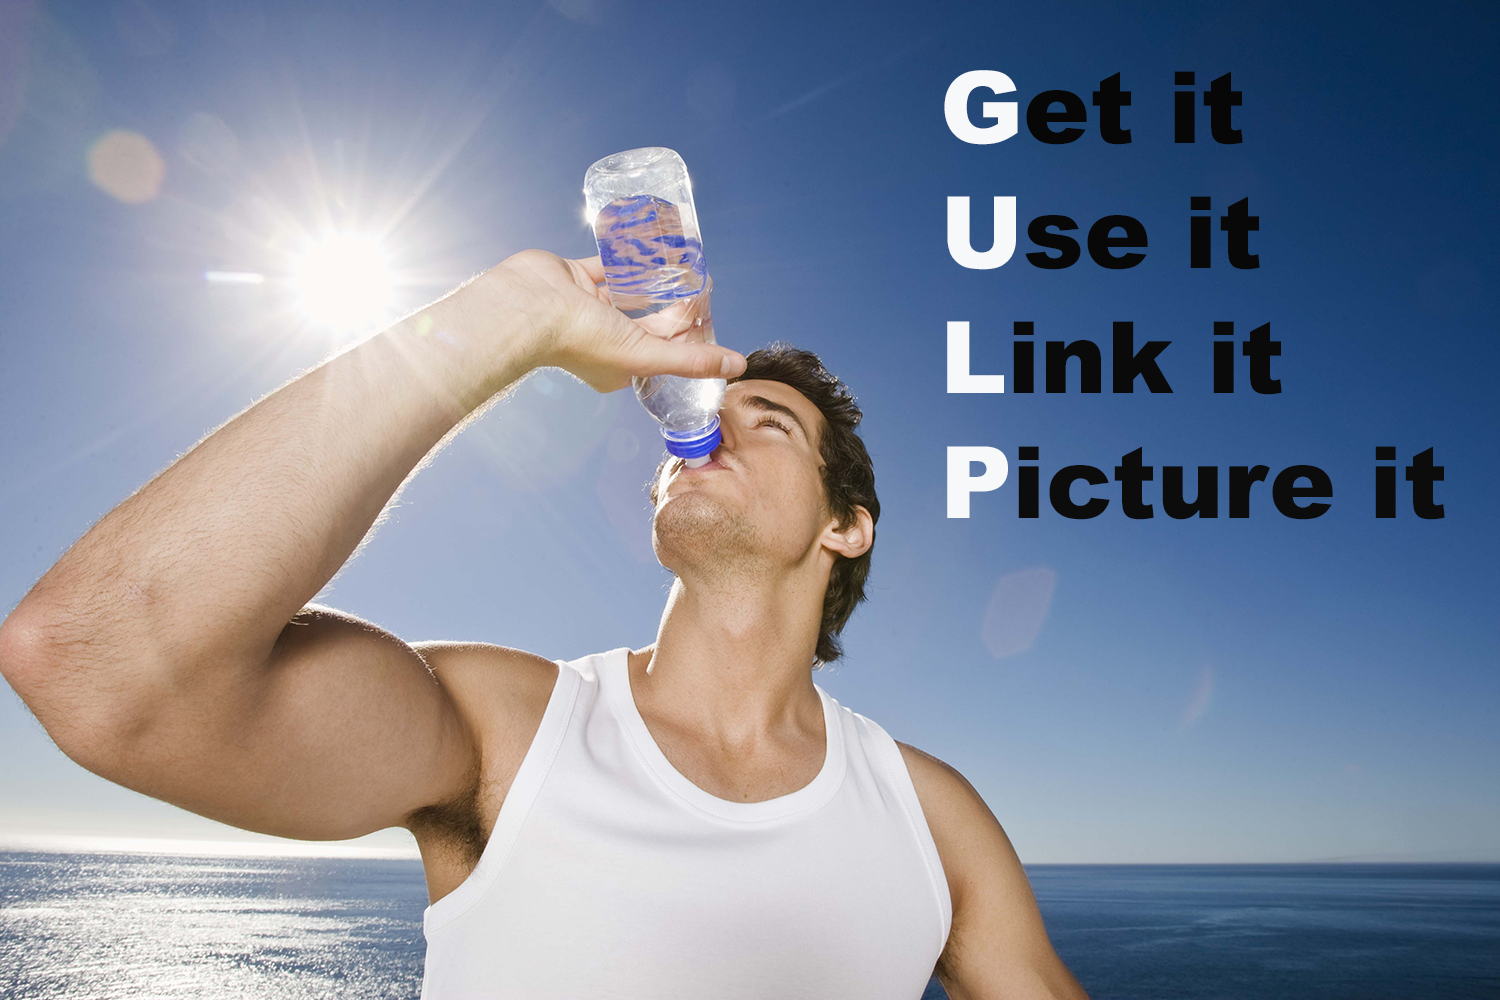 Image a fit young man gulping water from a bottle.  Text: Get it. Use it. Link it. Picture it. GULP is highlighted.